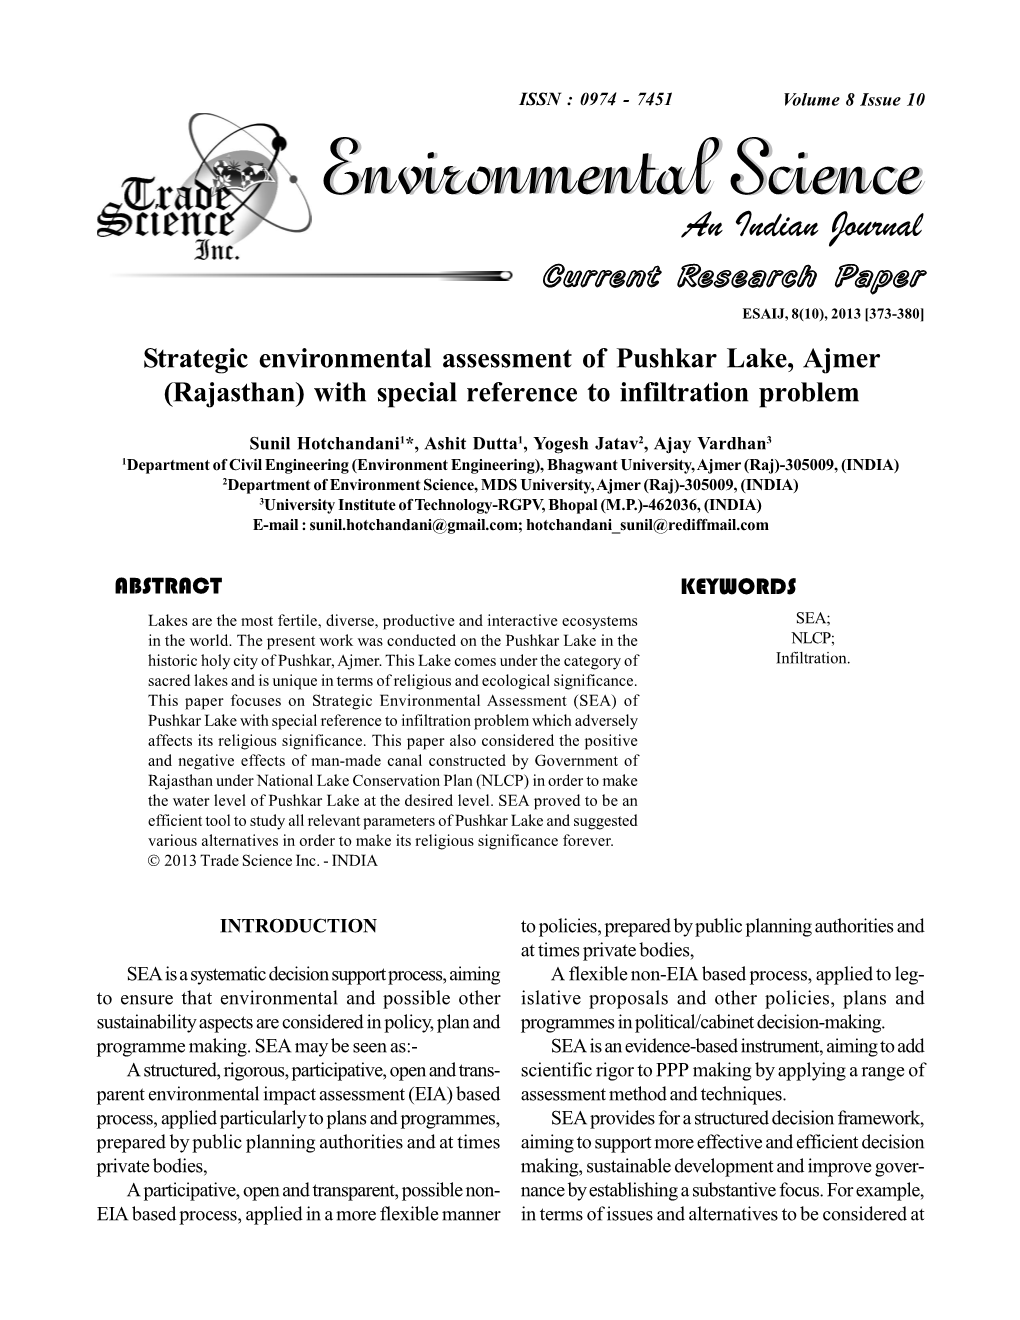 Strategic Environmental Assessment of Pushkar Lake, Ajmer (Rajasthan) with Special Reference to Infiltration Problem